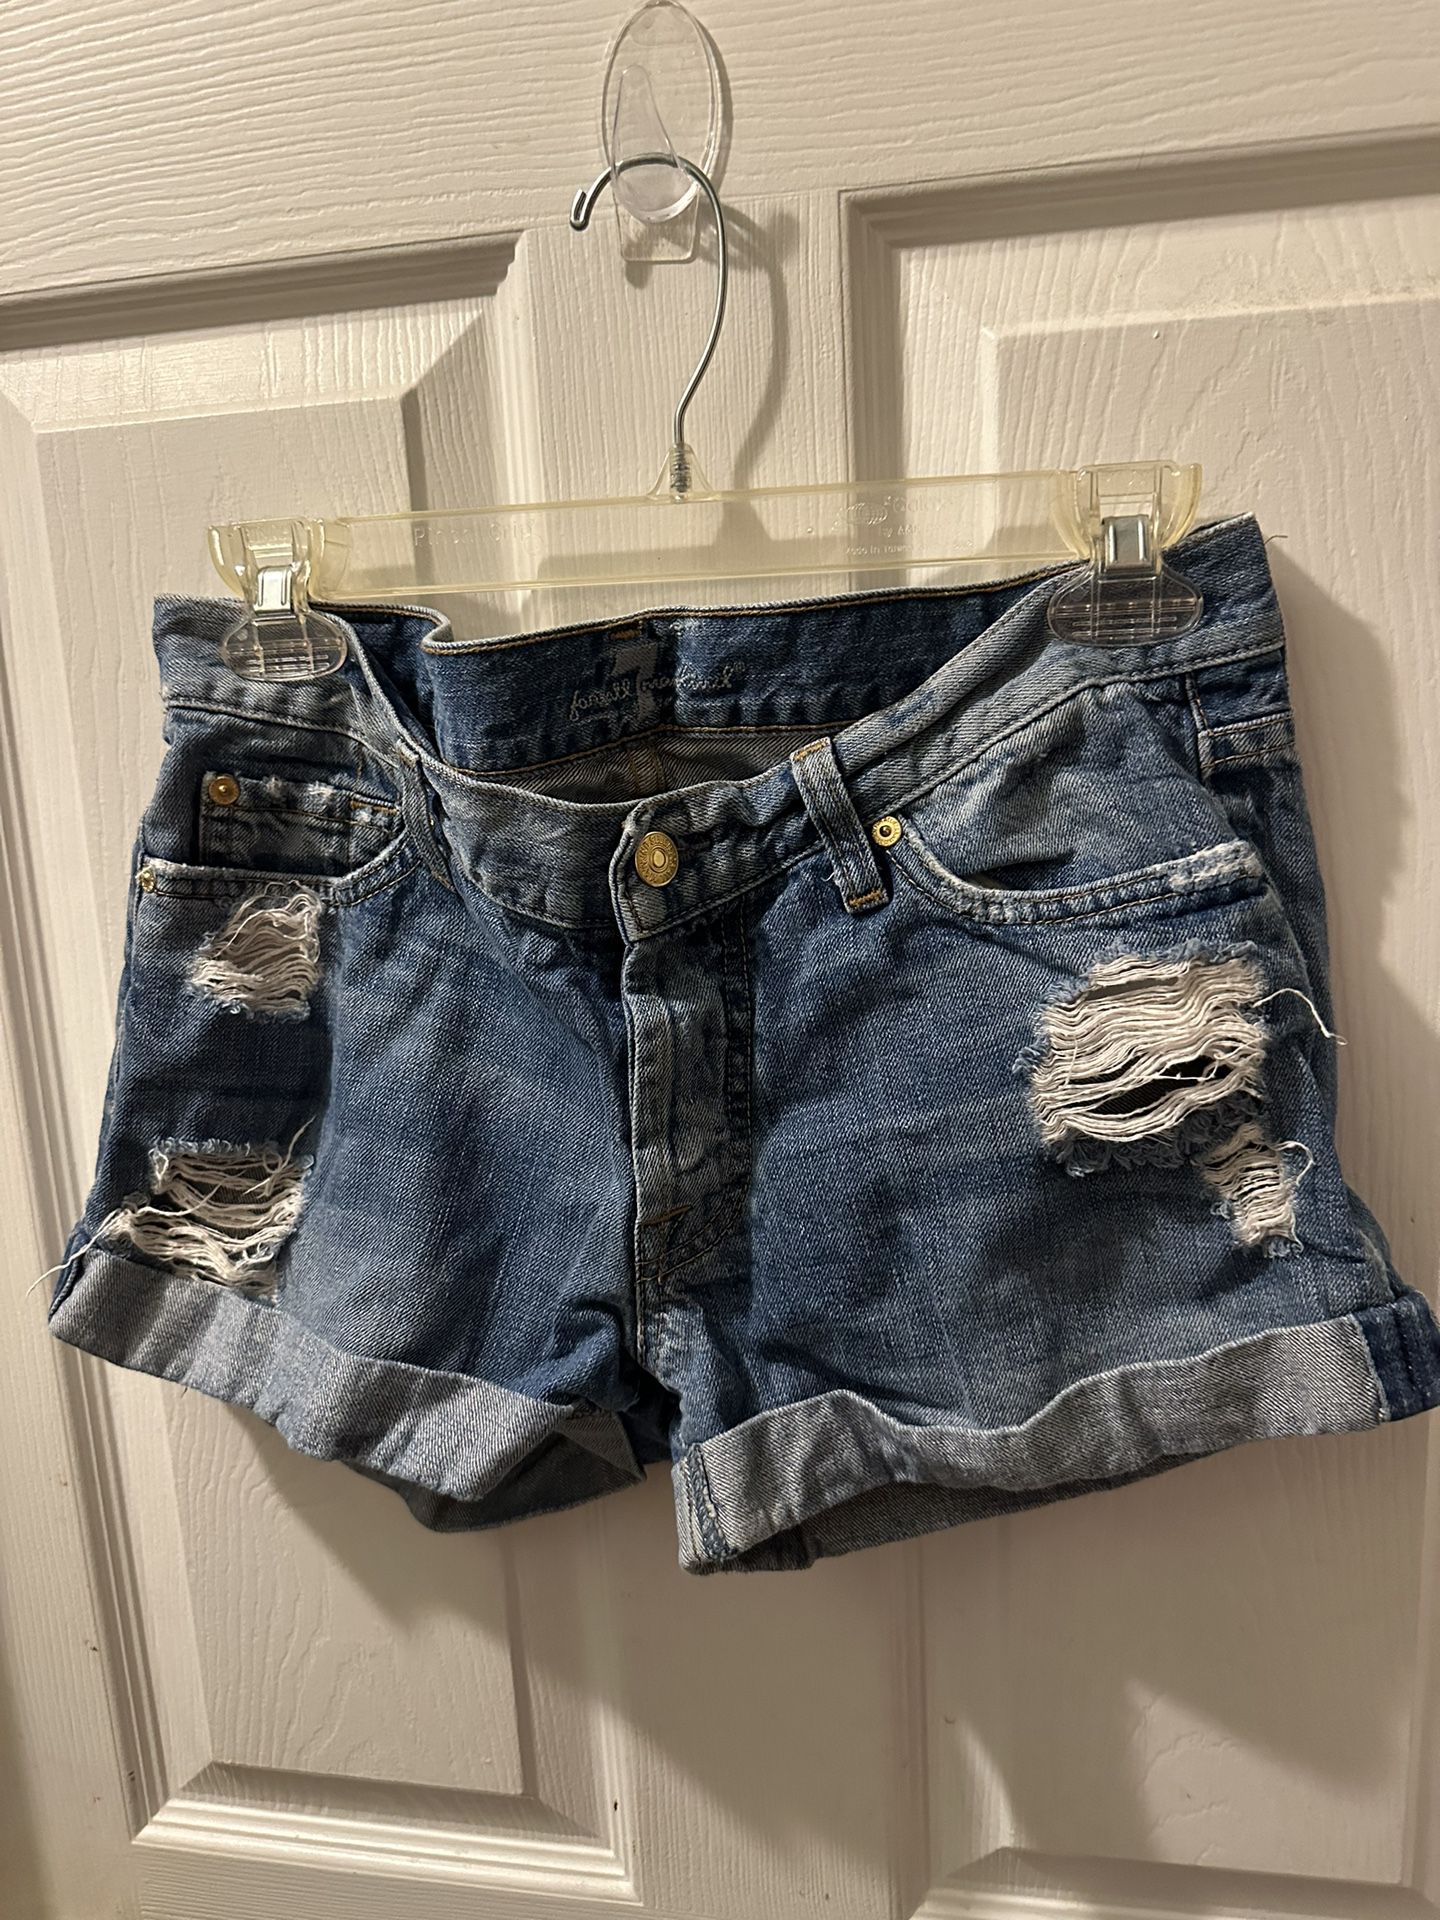 7 For All Mankind Distressed Denim Shorts Jeans Rolled Hem Size 27 Good Condition 